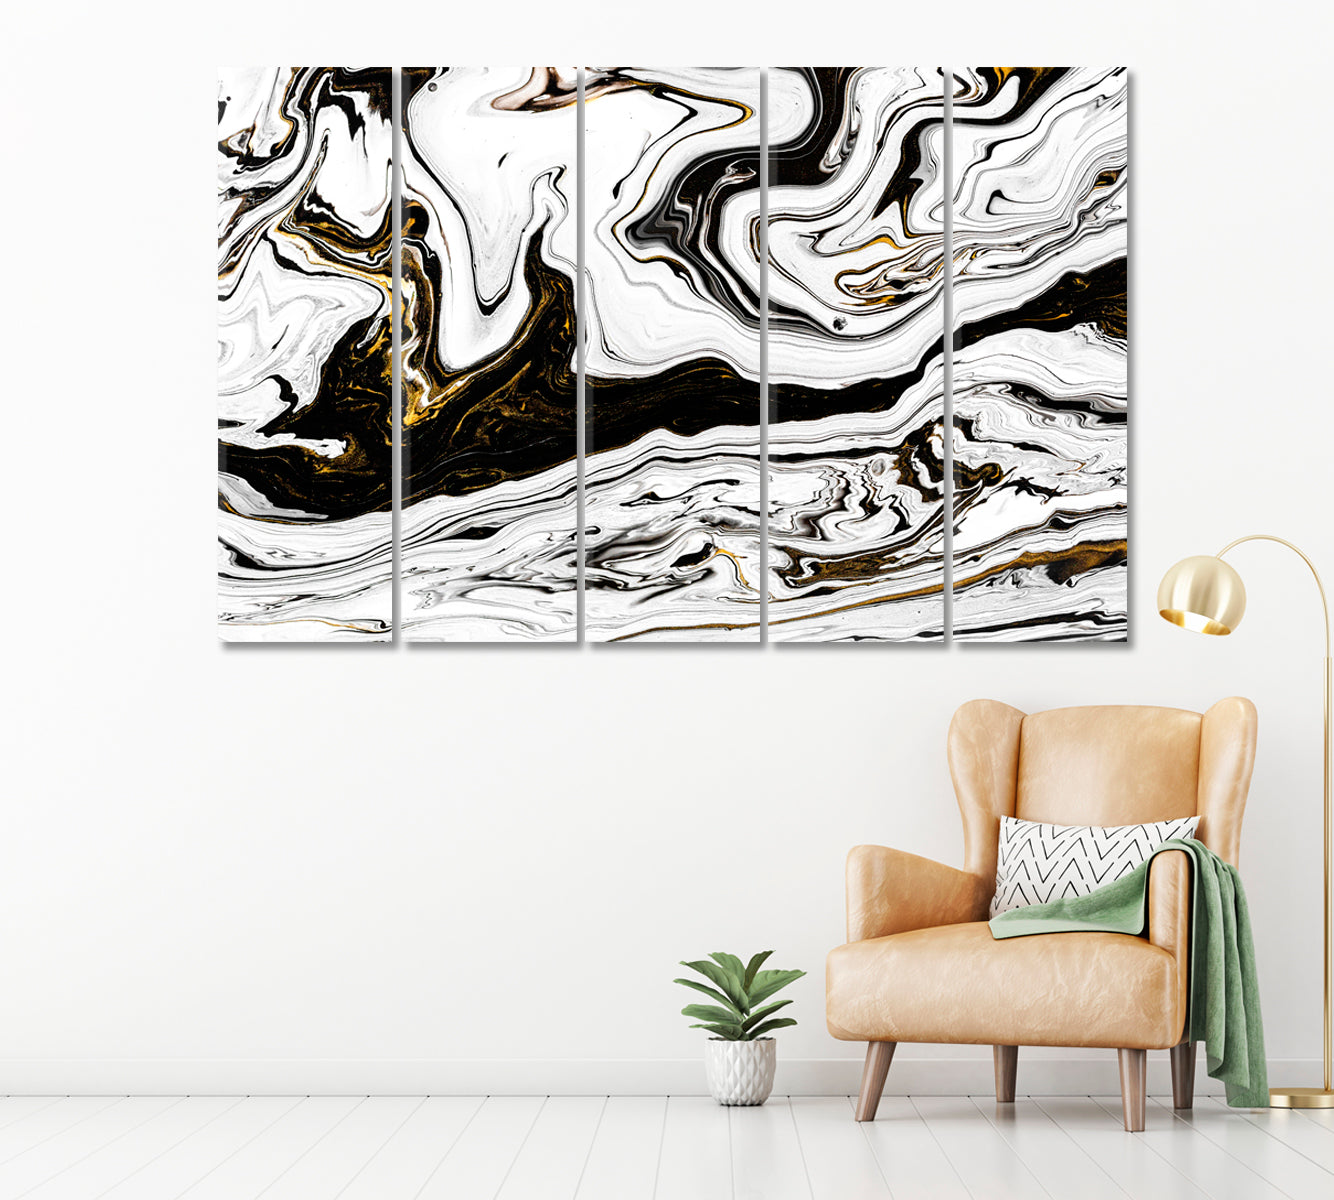 Black and White Marble Swirl Pattern Canvas Print ArtLexy 5 Panels 36"x24" inches 